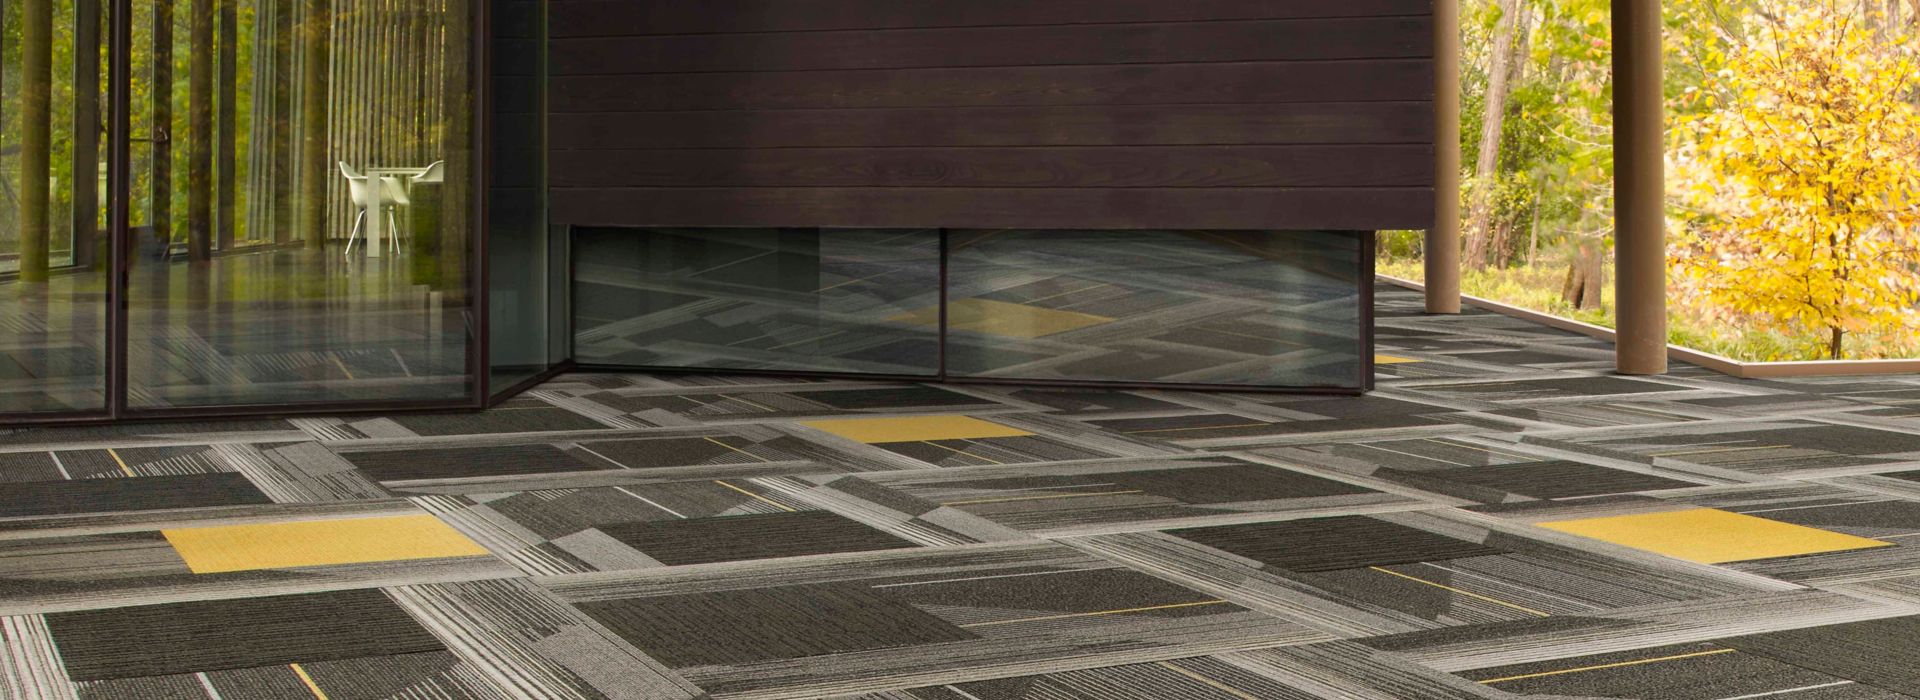 Interface CT102 and Viva Colores carpet tile with CT113 plank carpet tile in recreation area